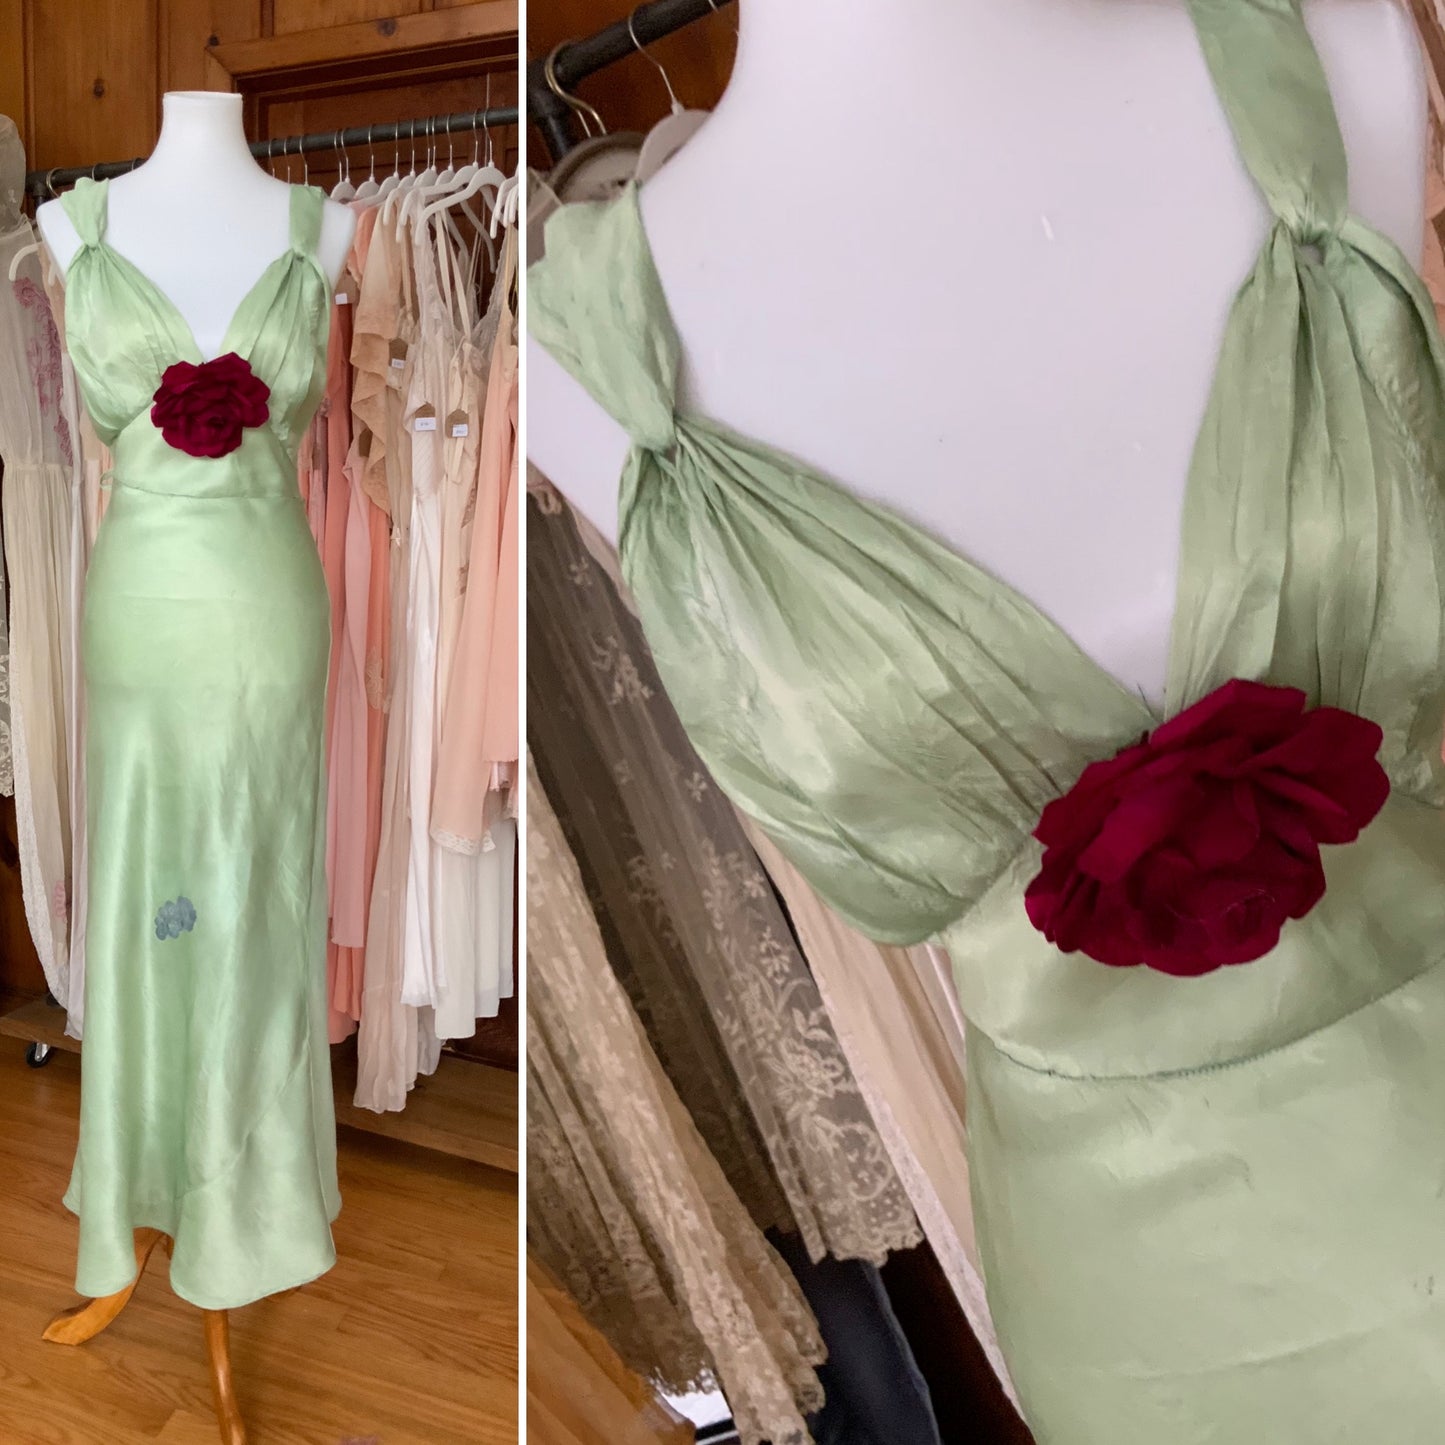 Hand Dyed Nightgown/Slip Dress - 50s